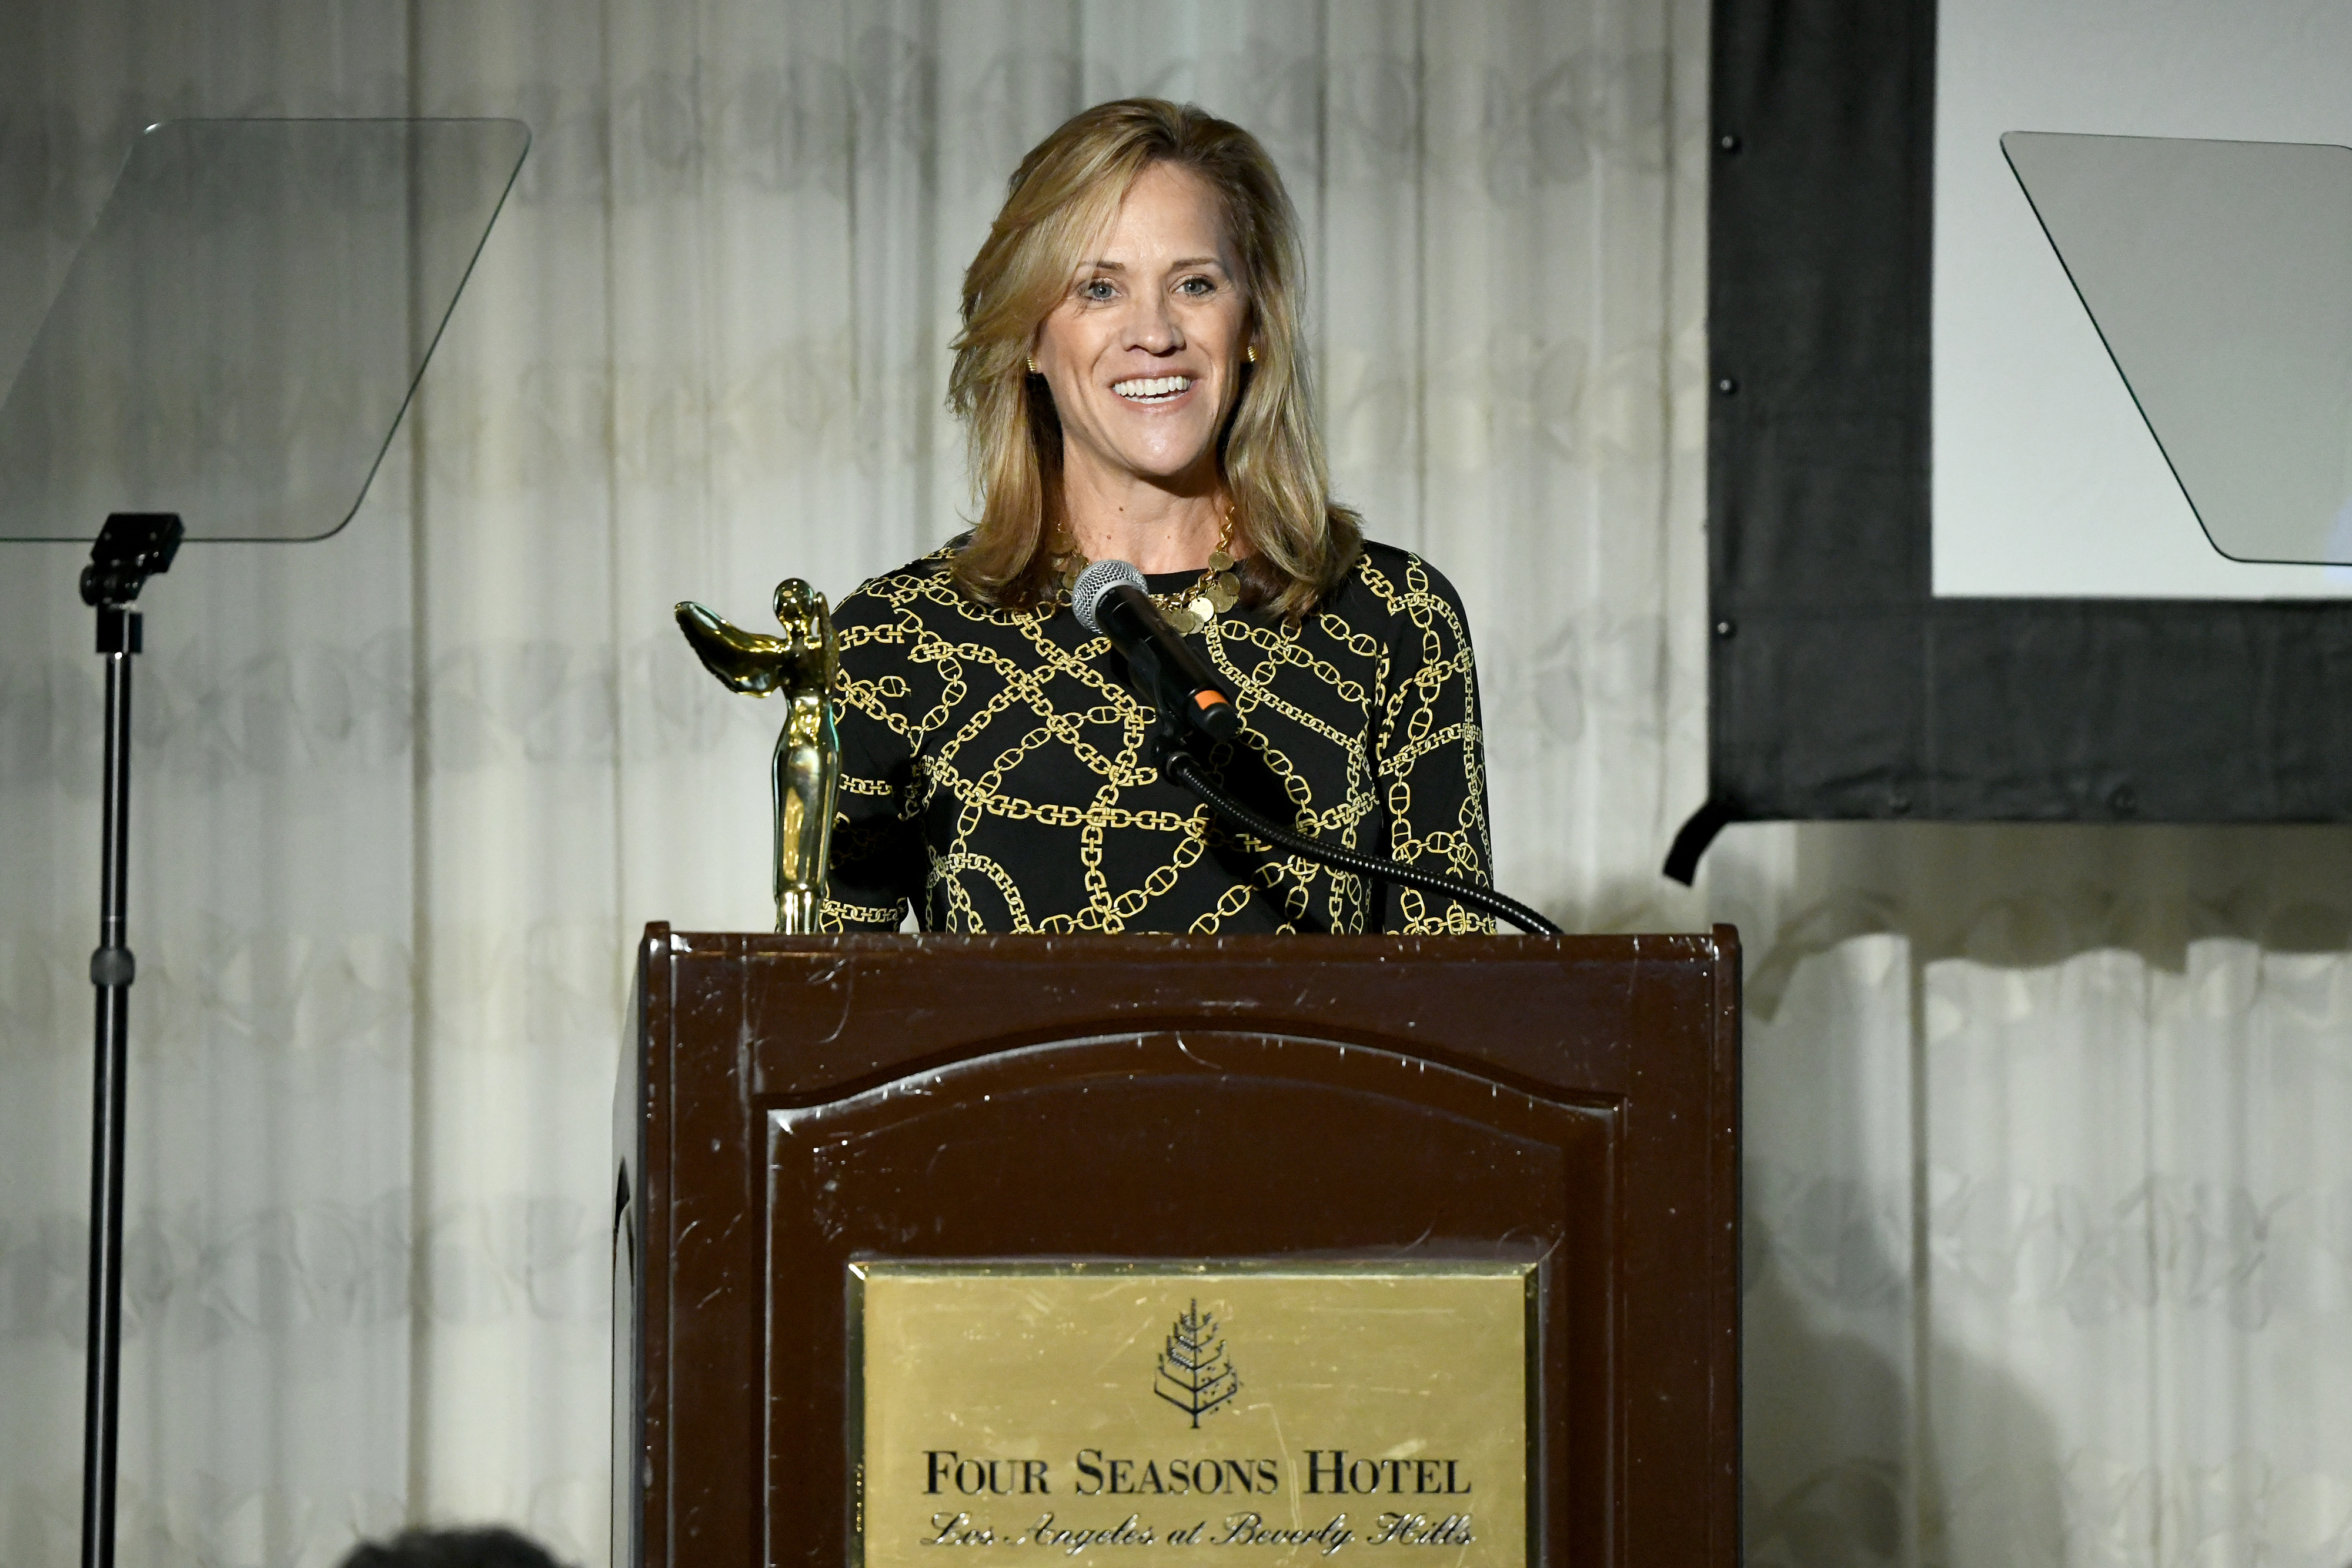 Dr. Seuss Enterprises President Susan Brandt accepts the Distinguished Leadership Award onstage at the Advanced Imaging Society Tech Awards Luncheon at Four Seasons Hotel Los Angeles at Beverly Hills on October 28, 2019 in Los Angeles. (Michael Kovac/Getty Images for Advanced Imaging Society)